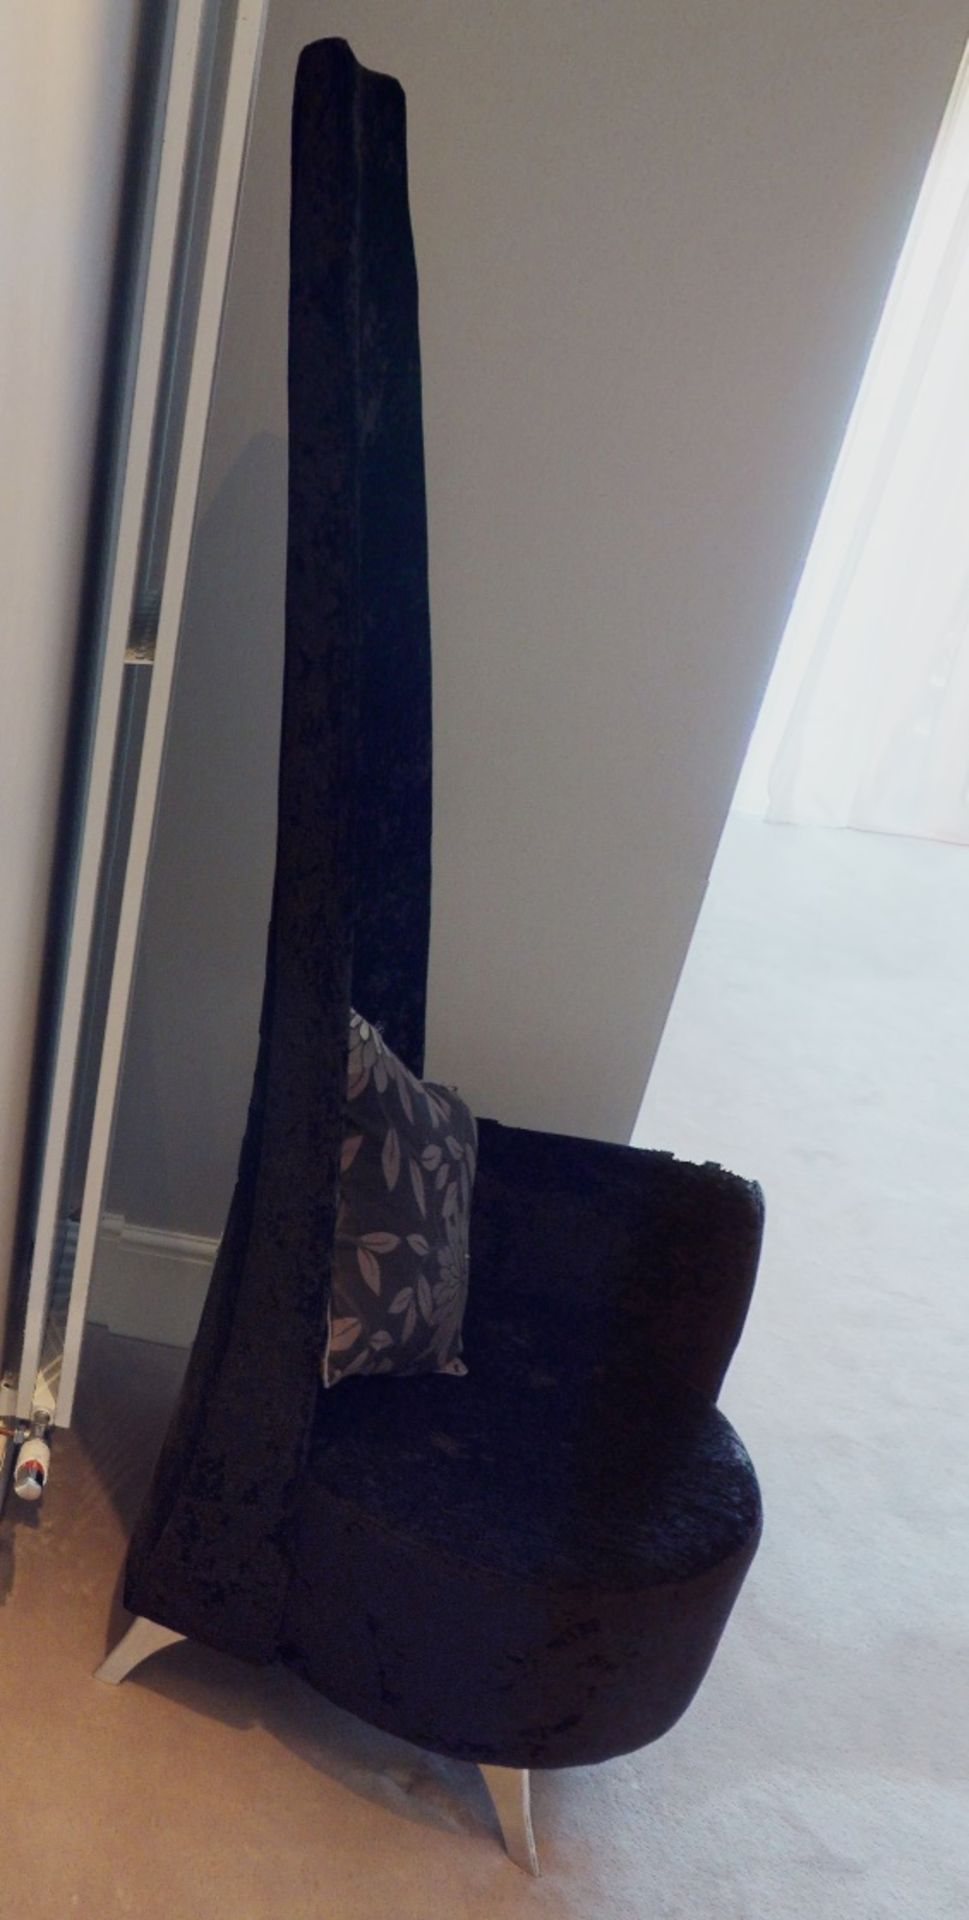 1 x Tall High Back Fabric Chair  To Be Removed From An Exclusive Property In Bowdon  - CL691- - Image 2 of 3